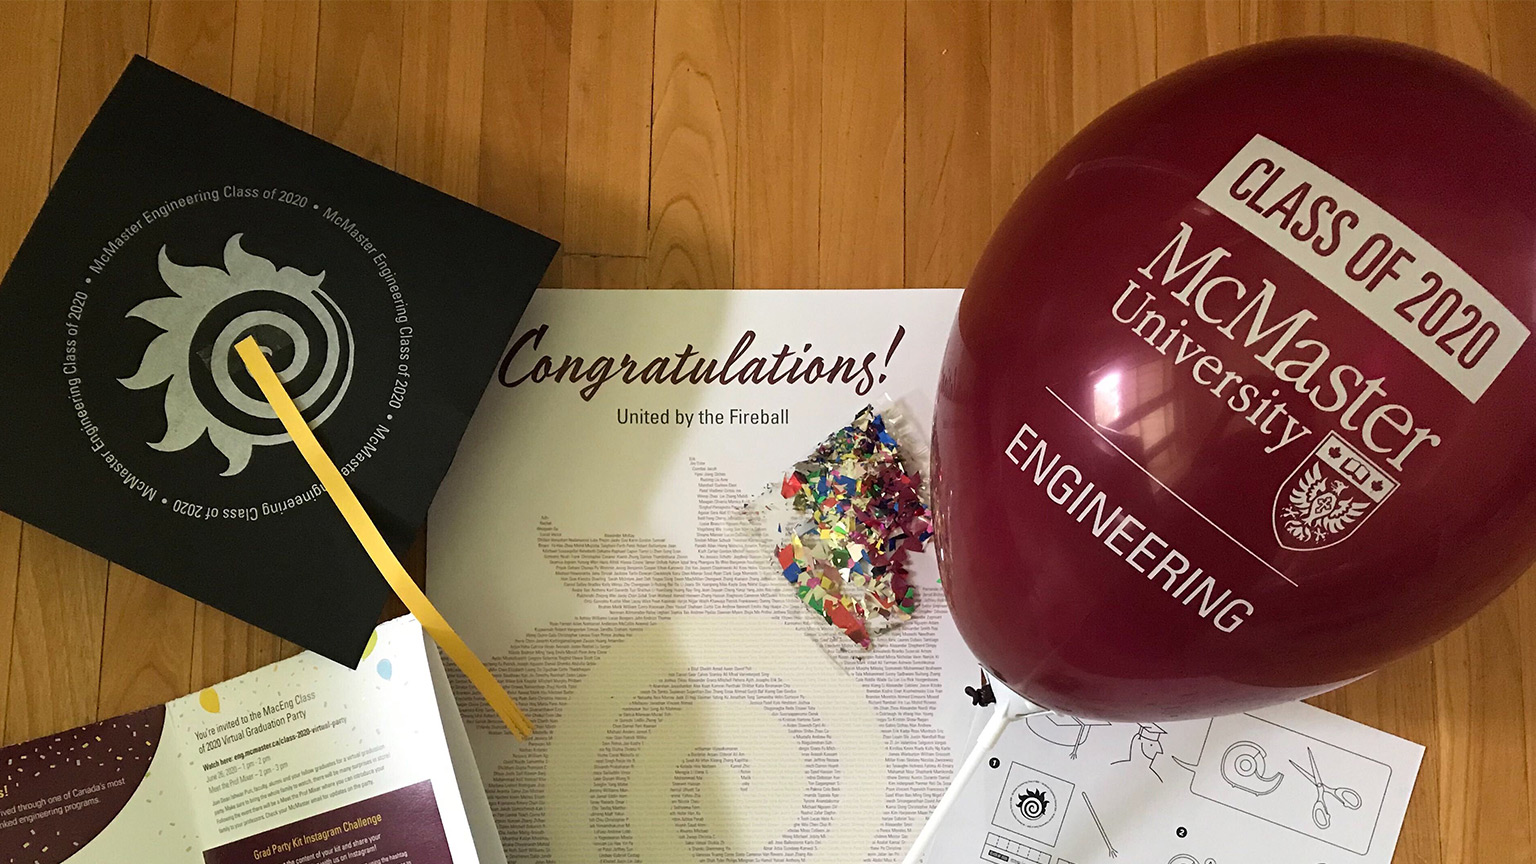 A fireball grad cap, a maroon balloon, a bag of confetti and fireball made out of the names of graduates were all included in the a kit sent to our 2020 graduates.